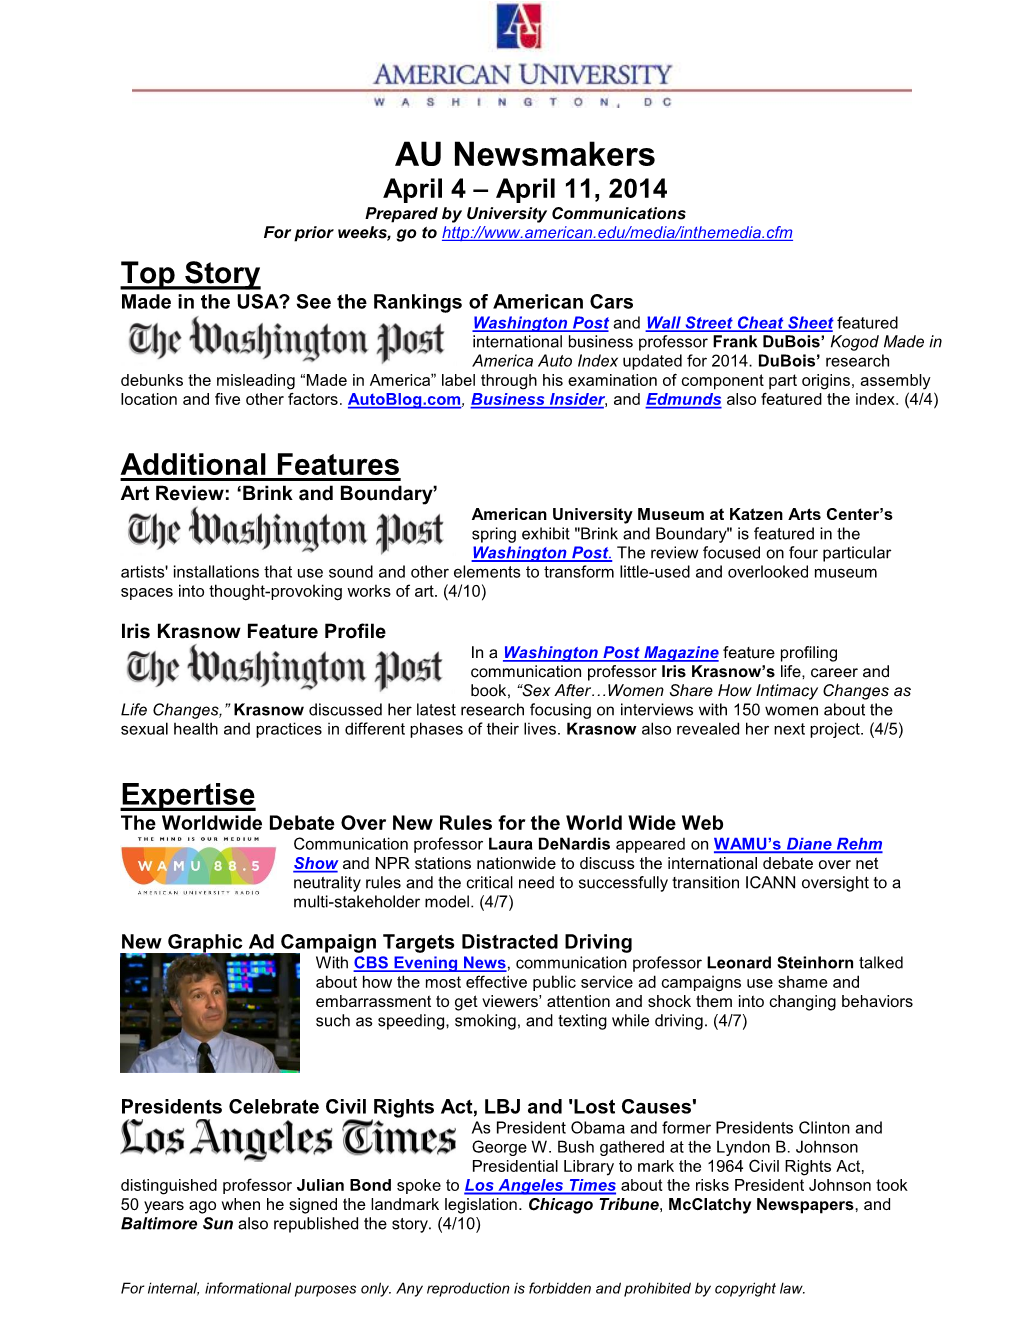 AU Newsmakers April 4 – April 11, 2014 Prepared by University Communications for Prior Weeks, Go To